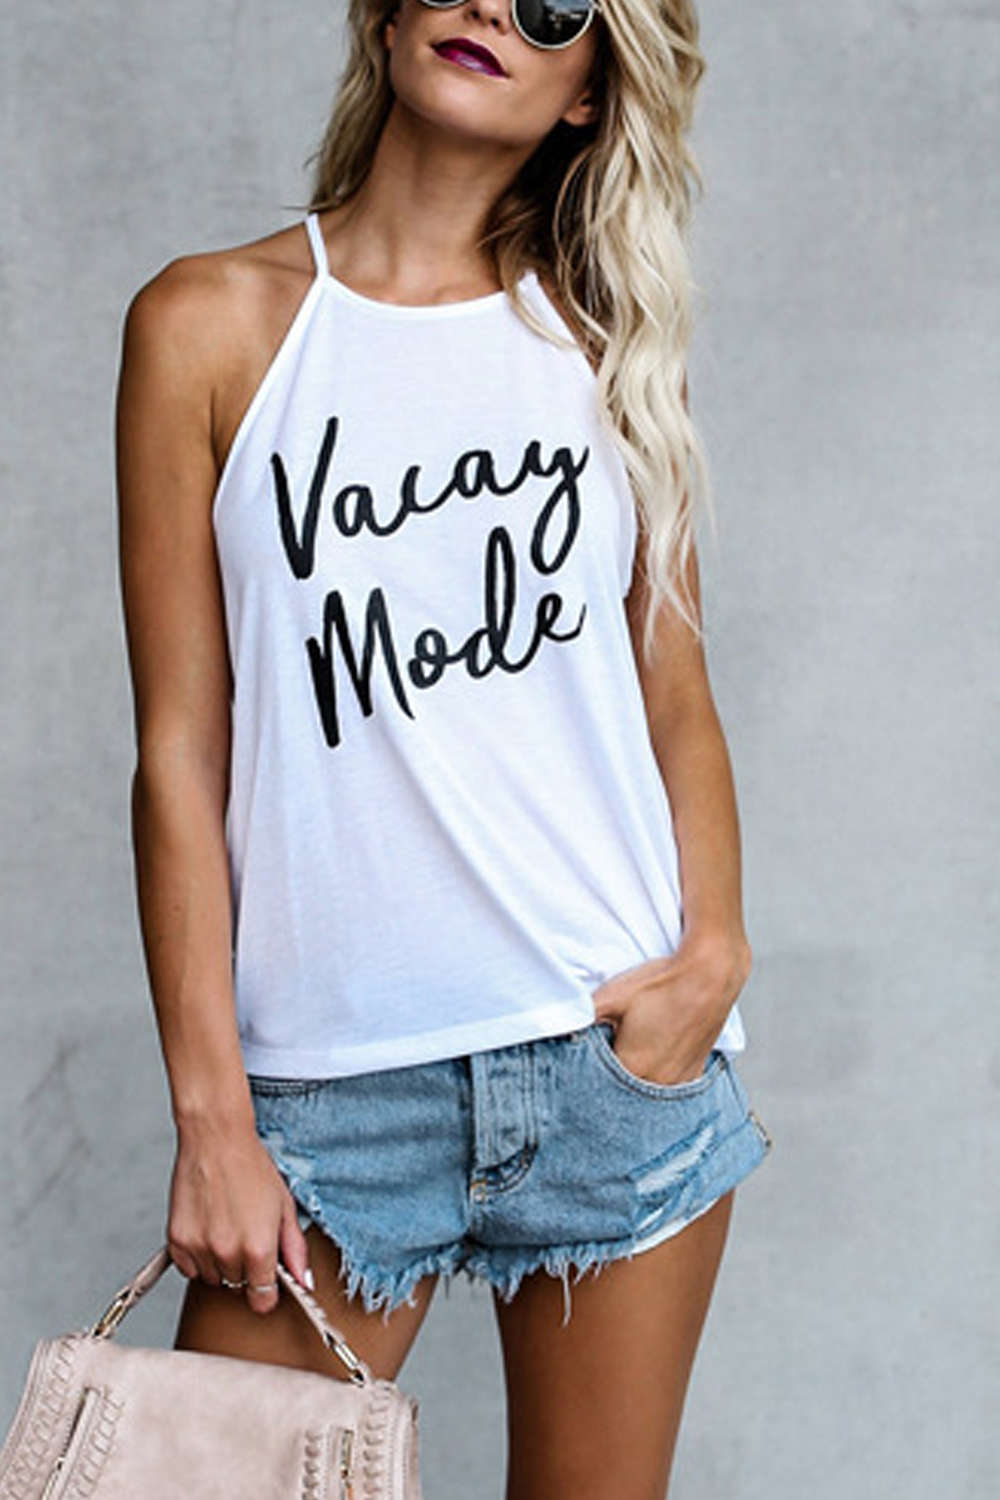 Iyasson Letter Printed Tank Top T-shirt